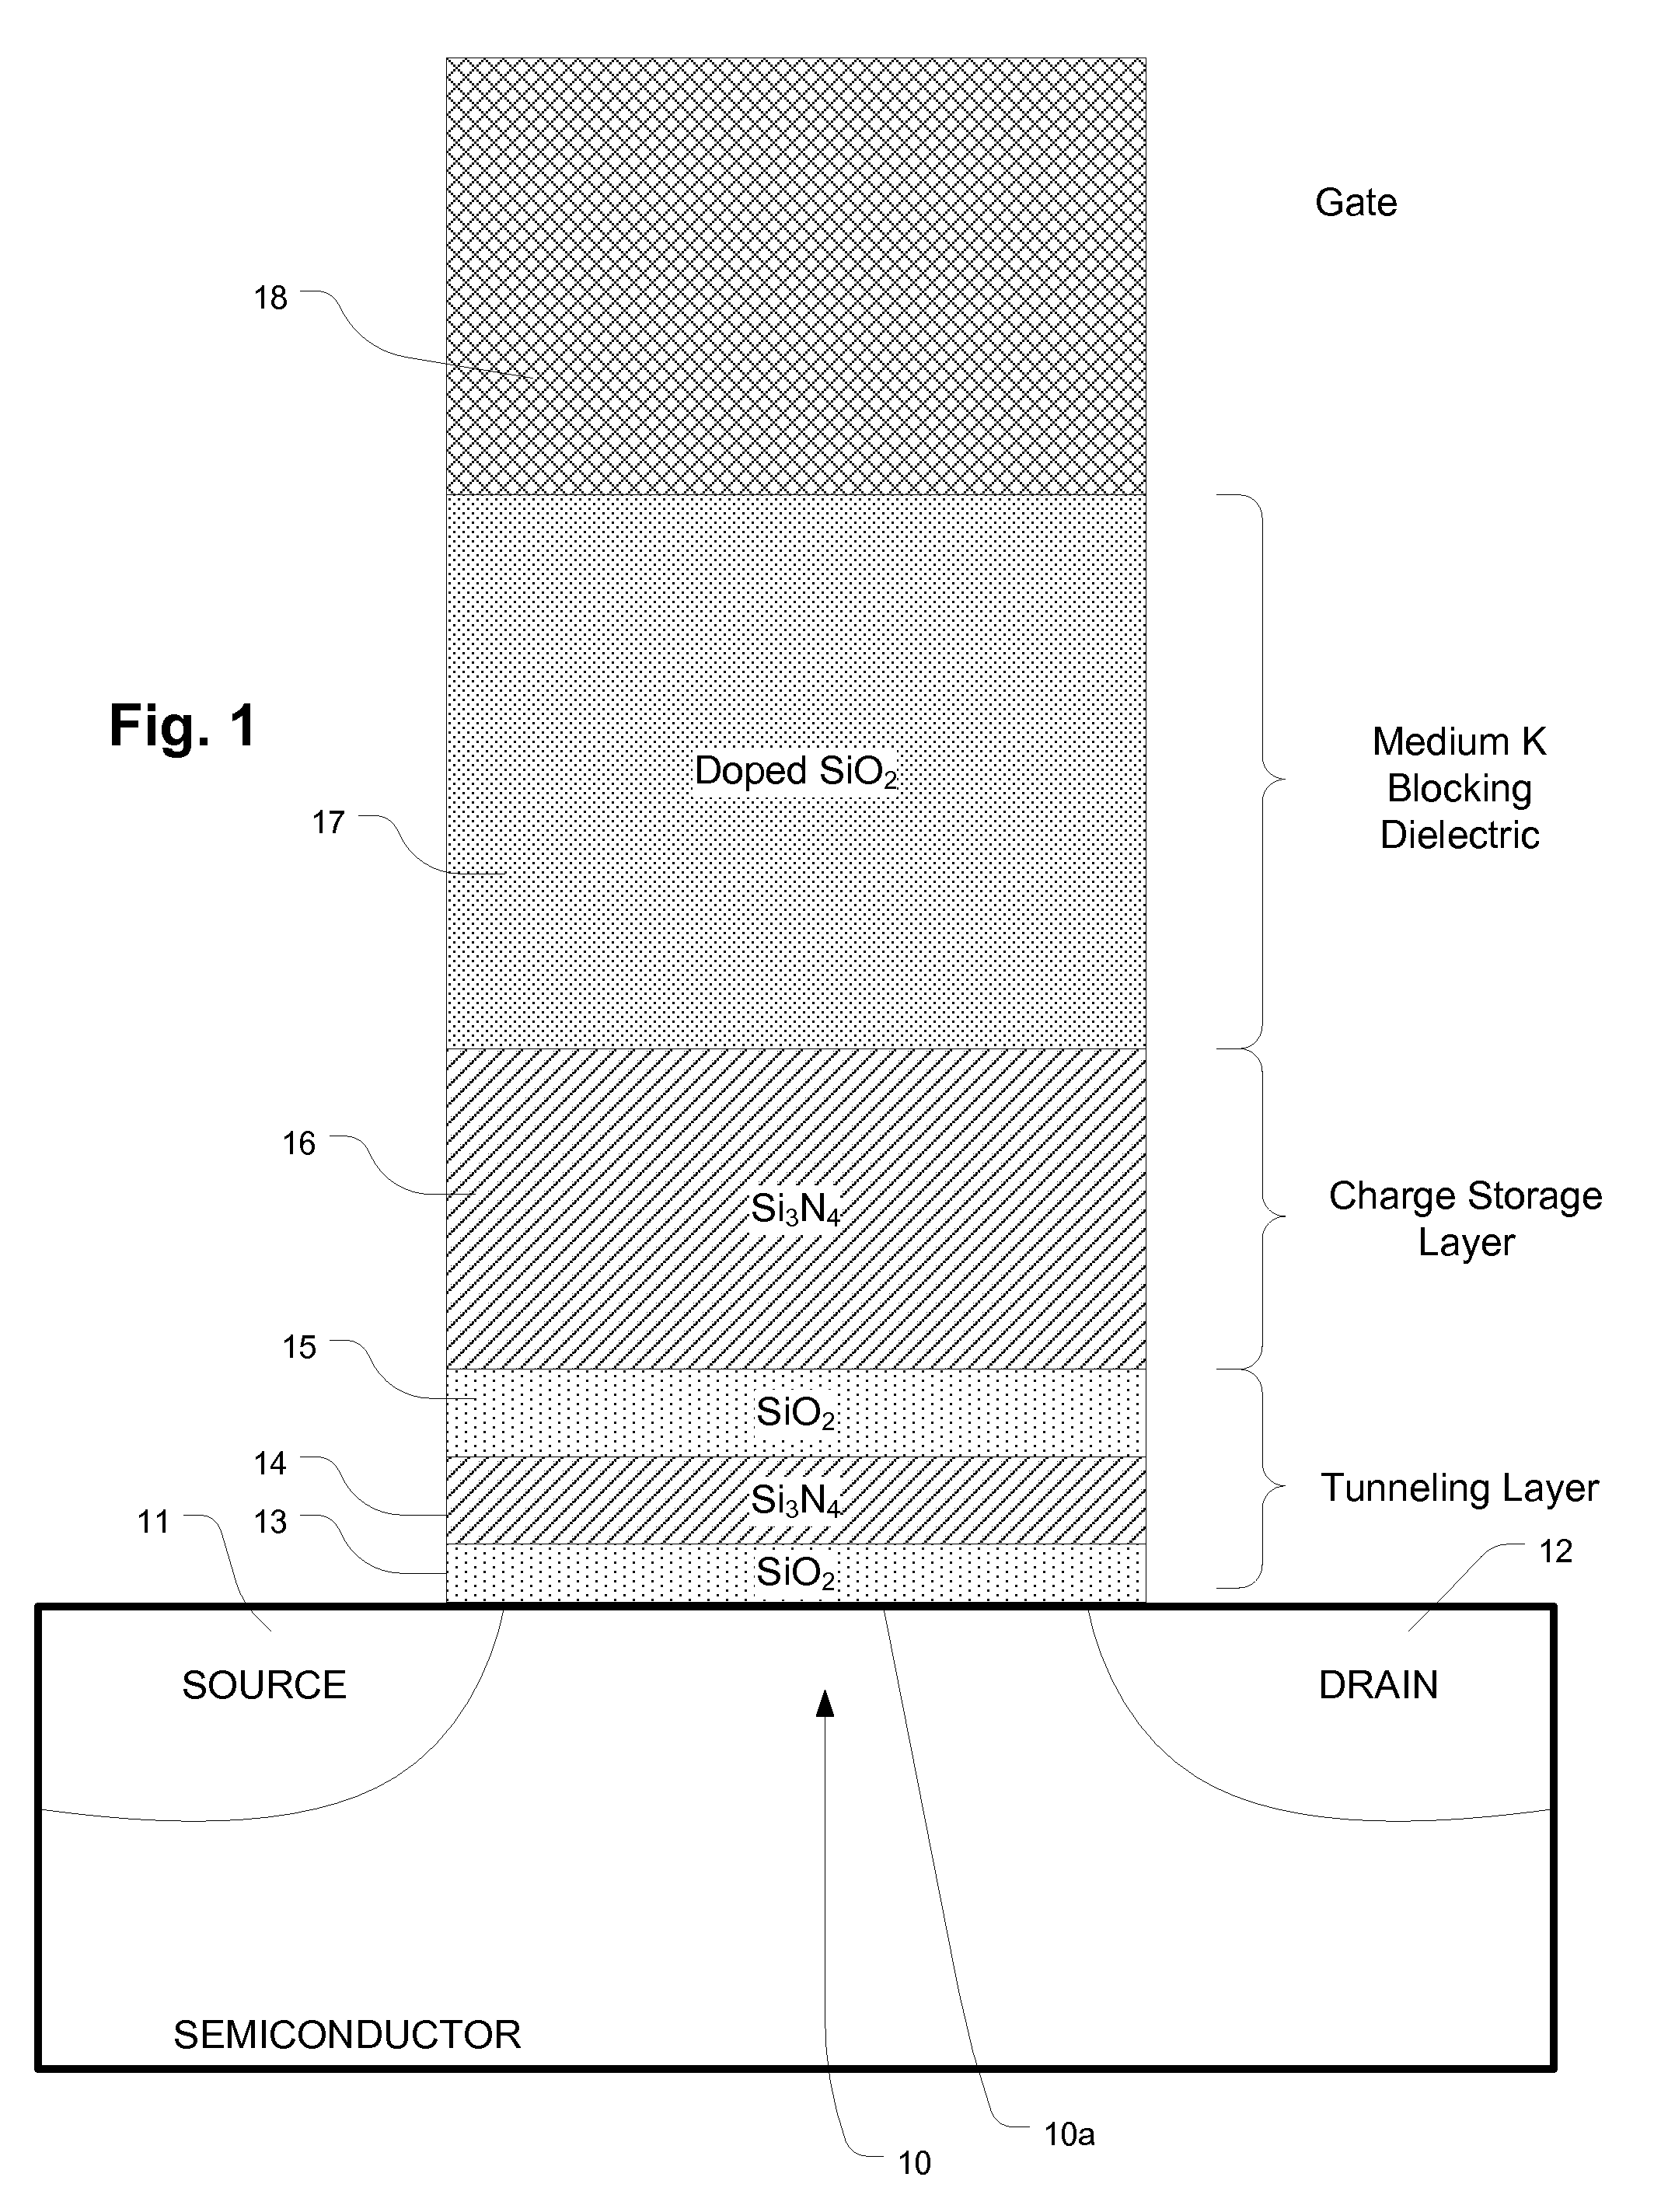 Blocking dielectric engineered charge trapping memory cell with high speed erase